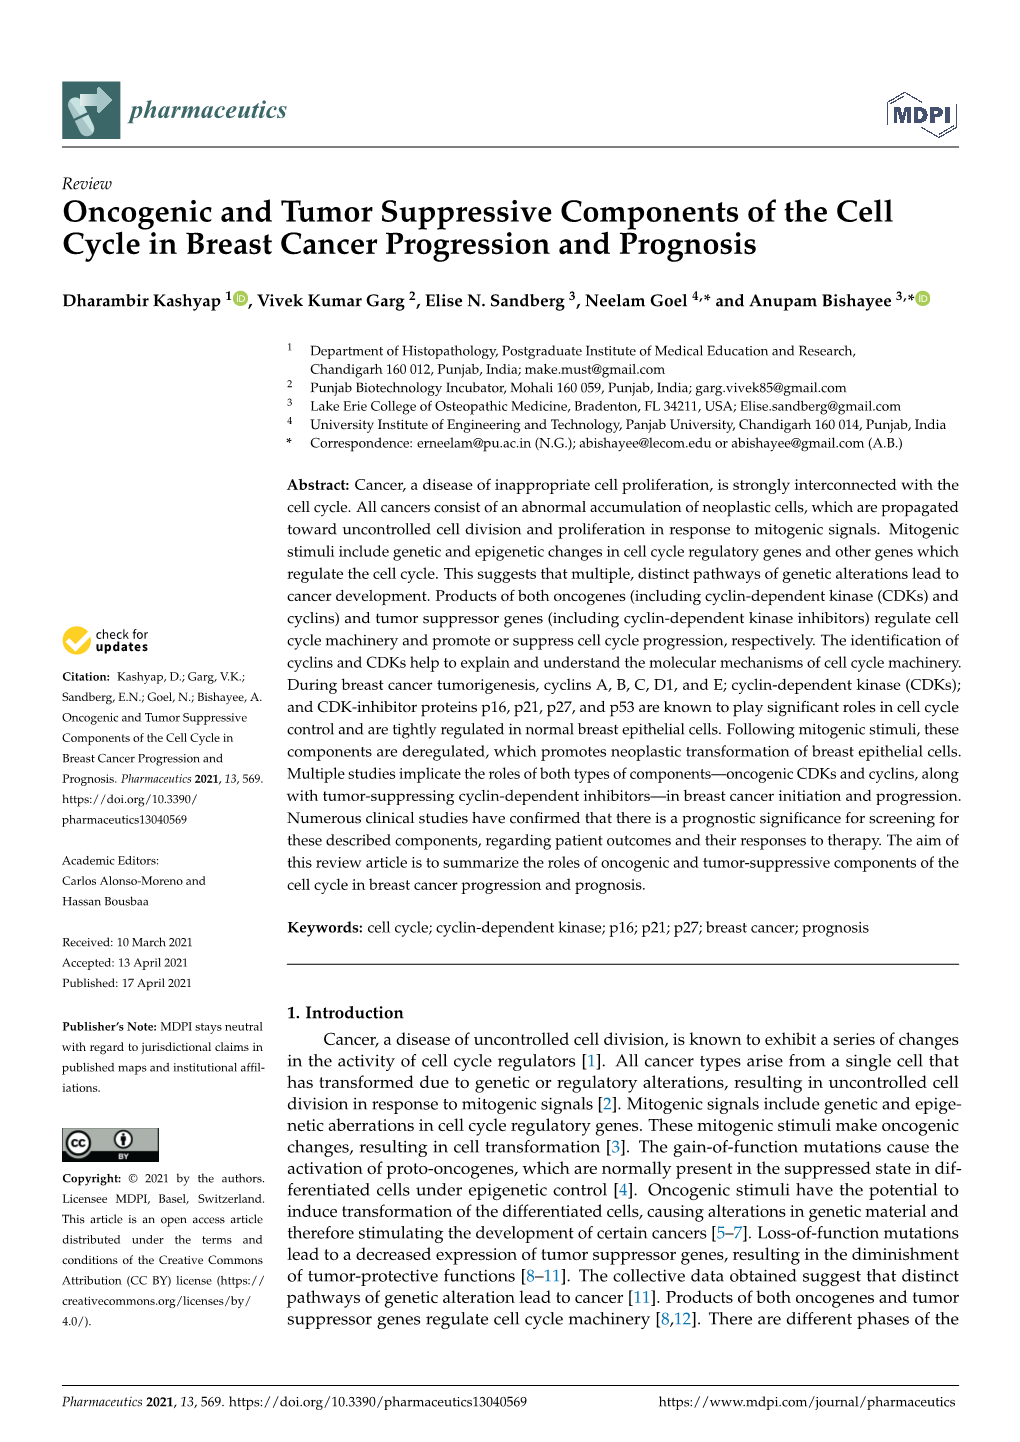 Oncogenic and Tumor Suppressive Components of the Cell Cycle in Breast Cancer Progression and Prognosis